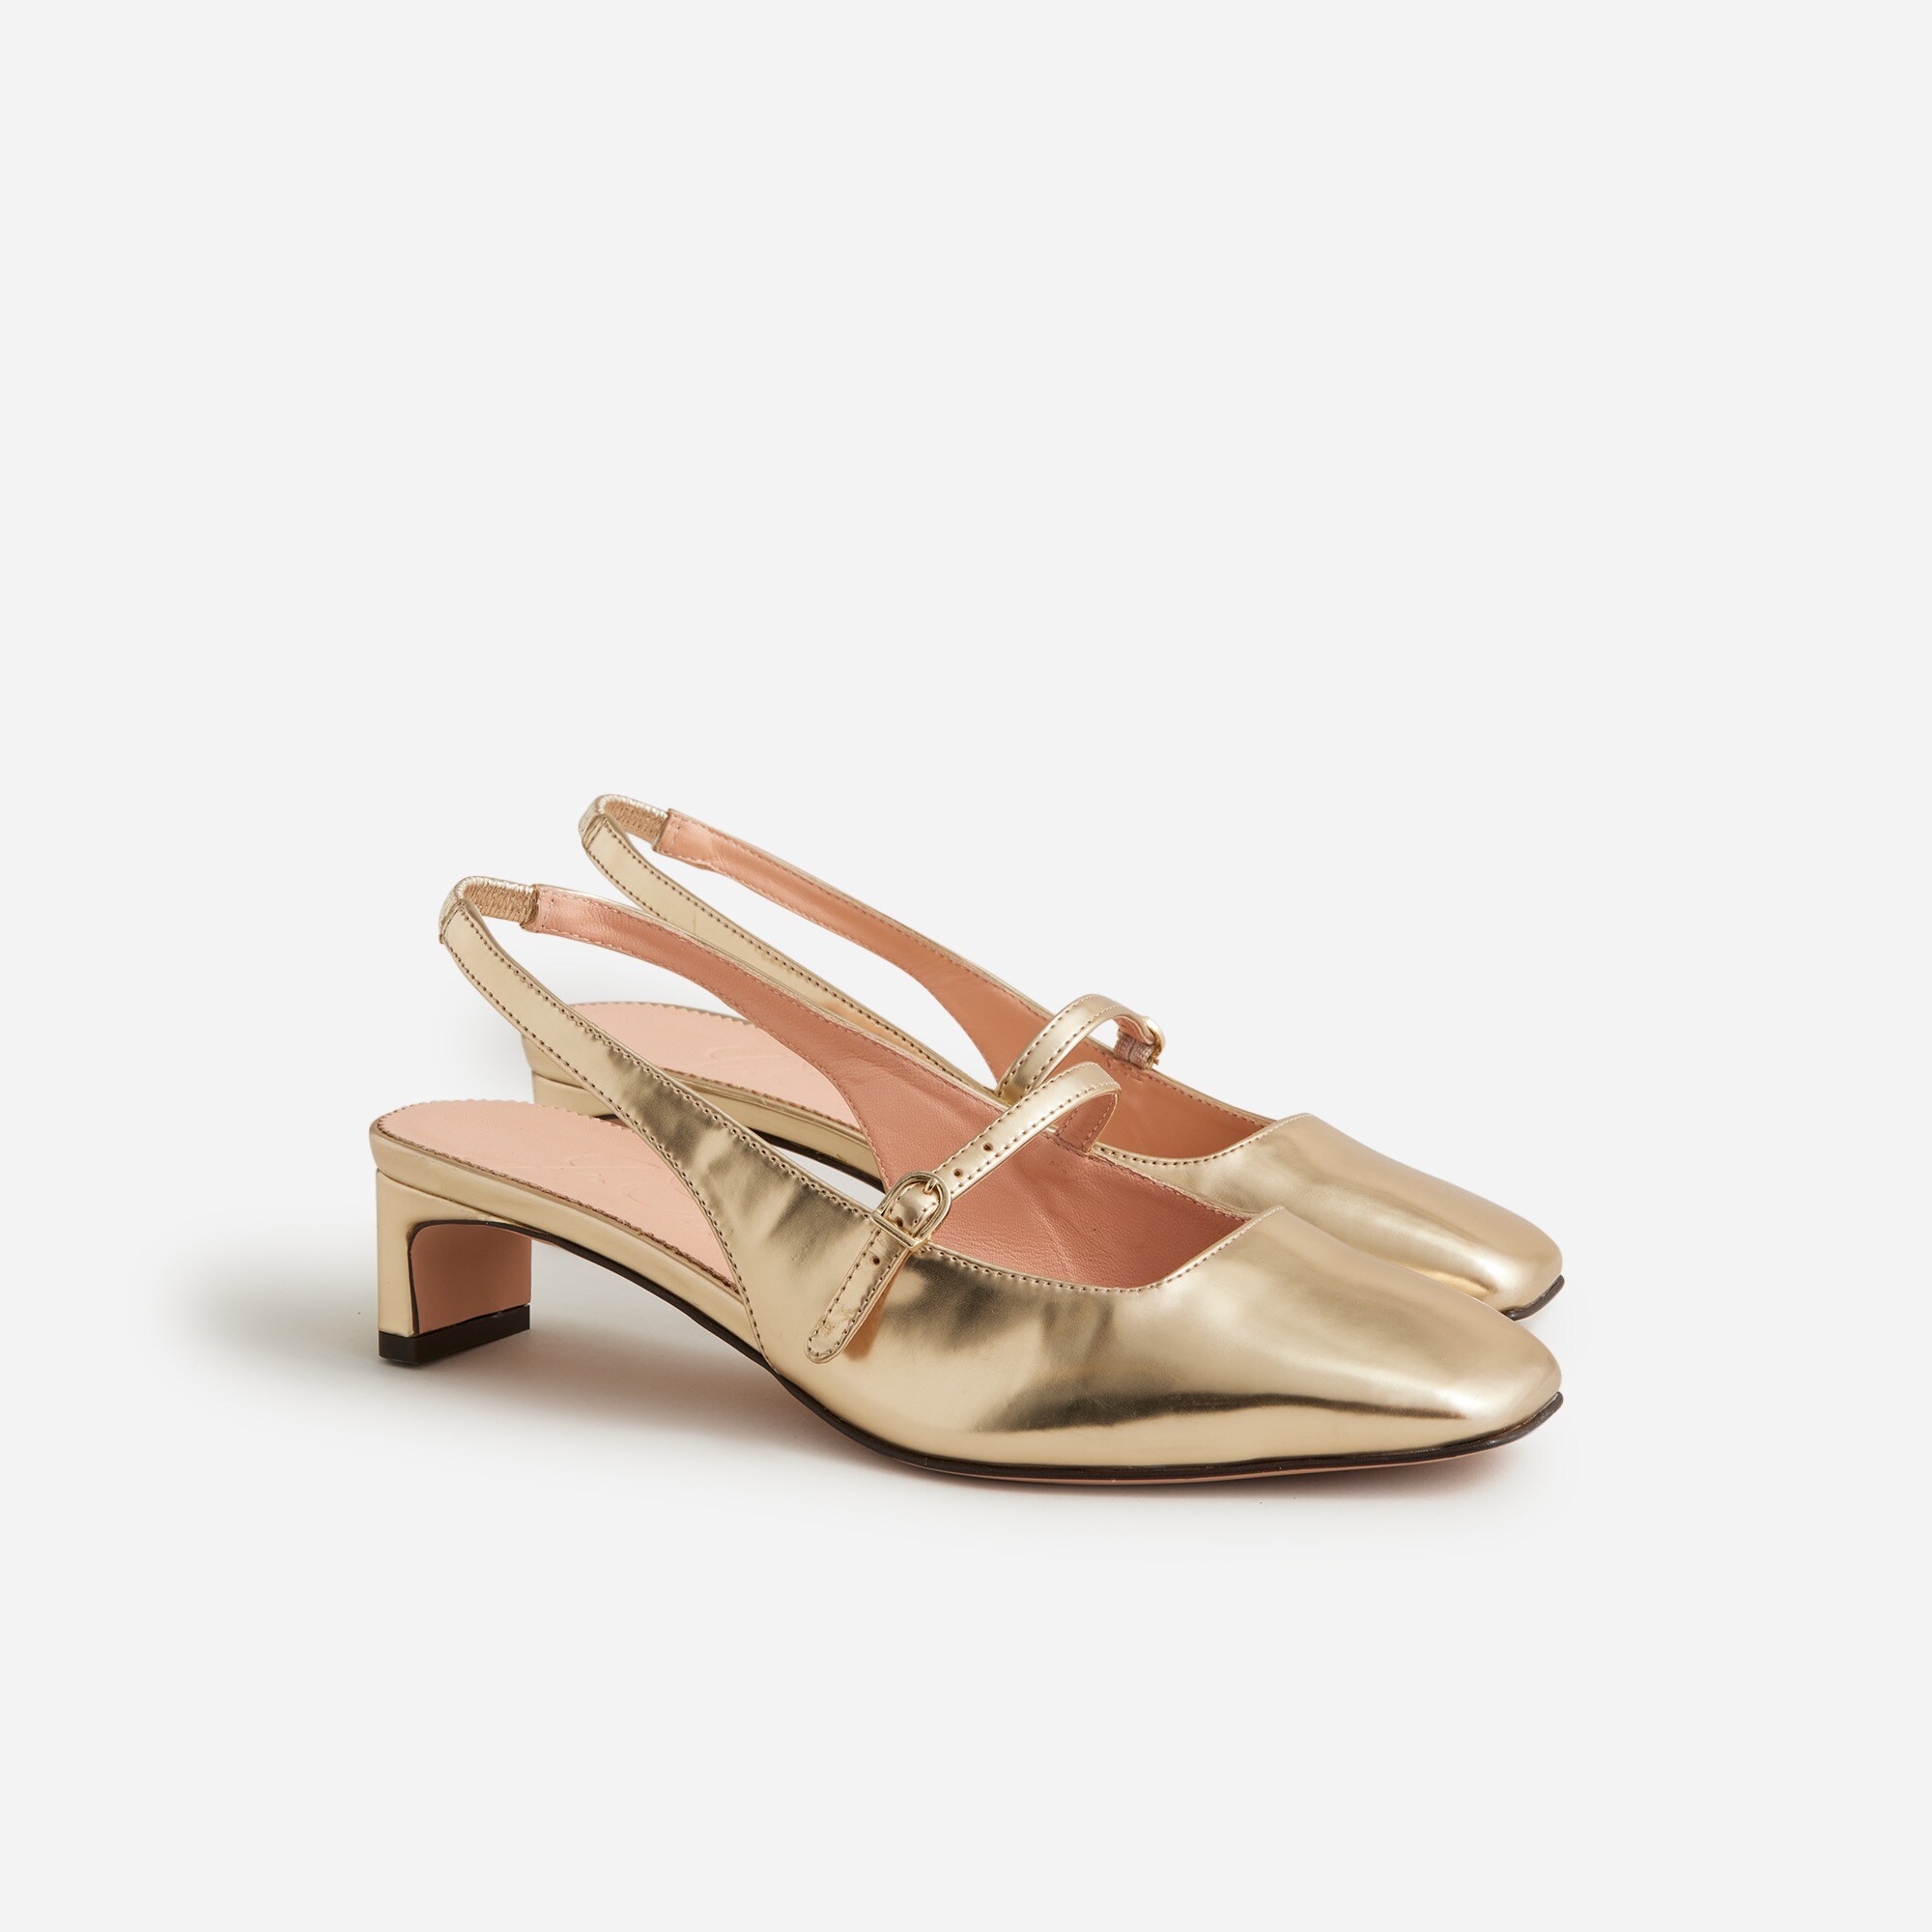  Layla slingback Mary Jane heels in specchio leather